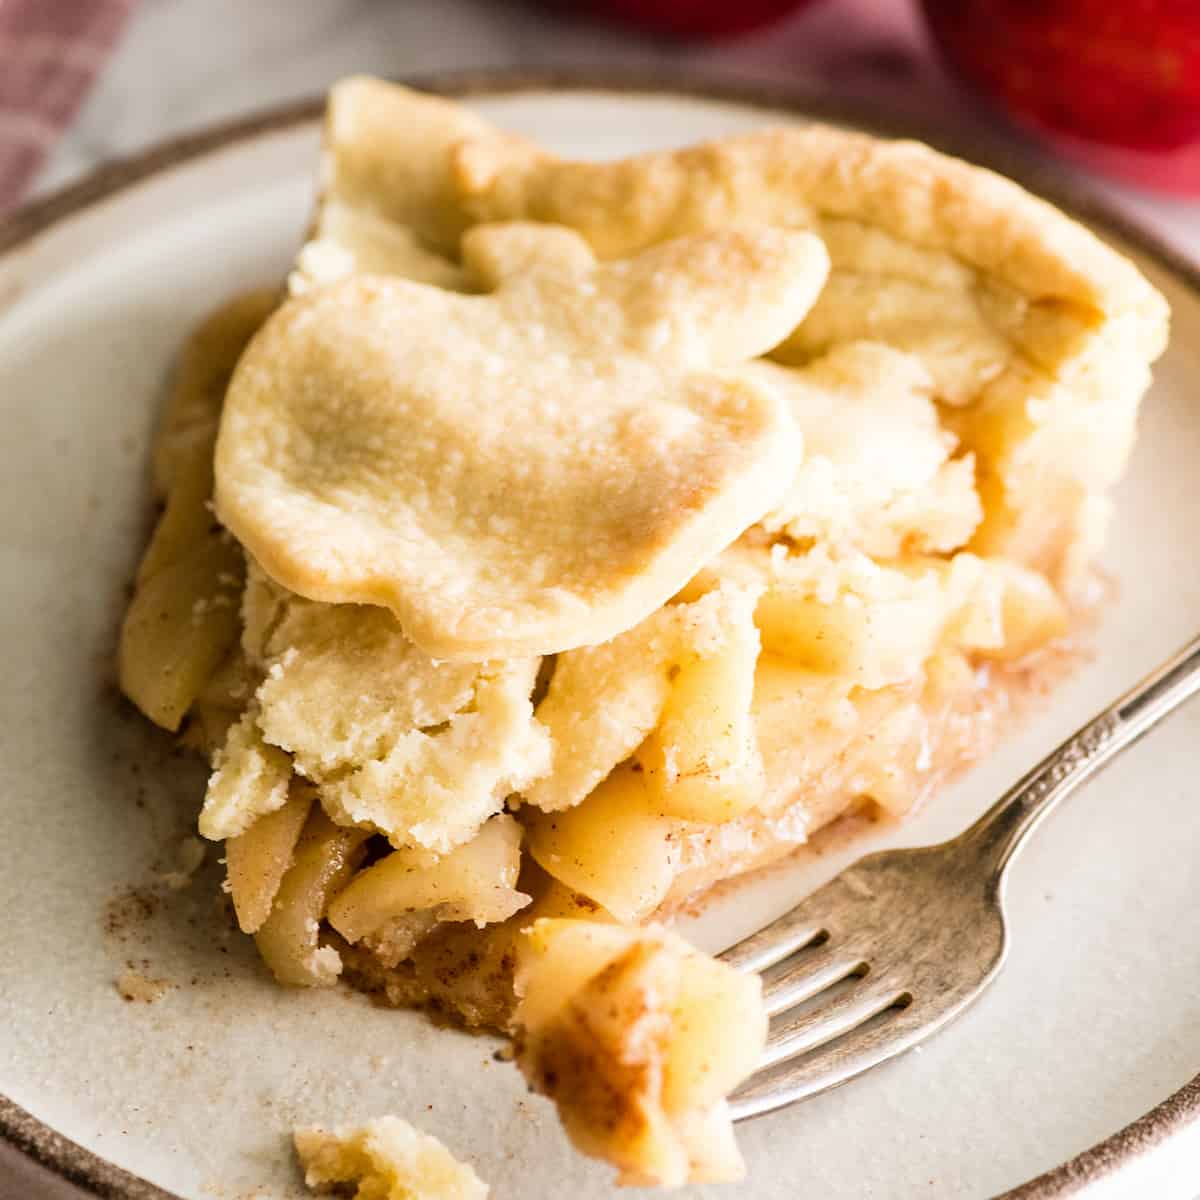 piece of apple pie on a plate with a fork taking a bite